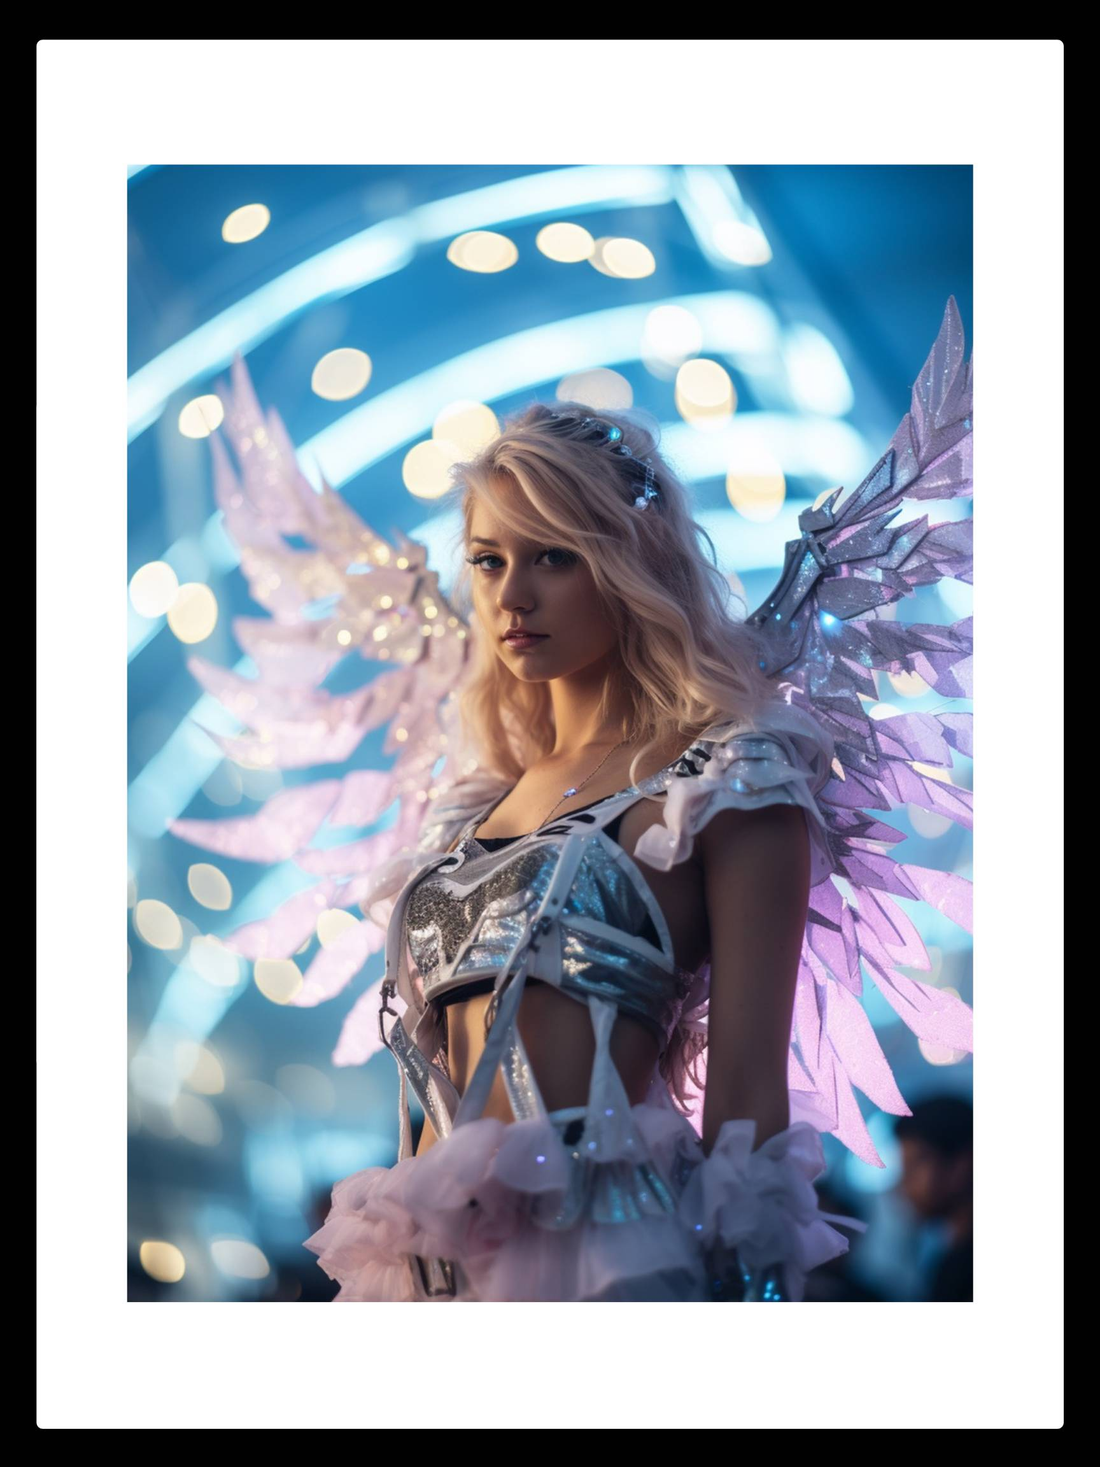 A lone angelic figure with soft pink wings radiates tranquility and beauty in this poster art, capturing the essence of a dreamlike festival